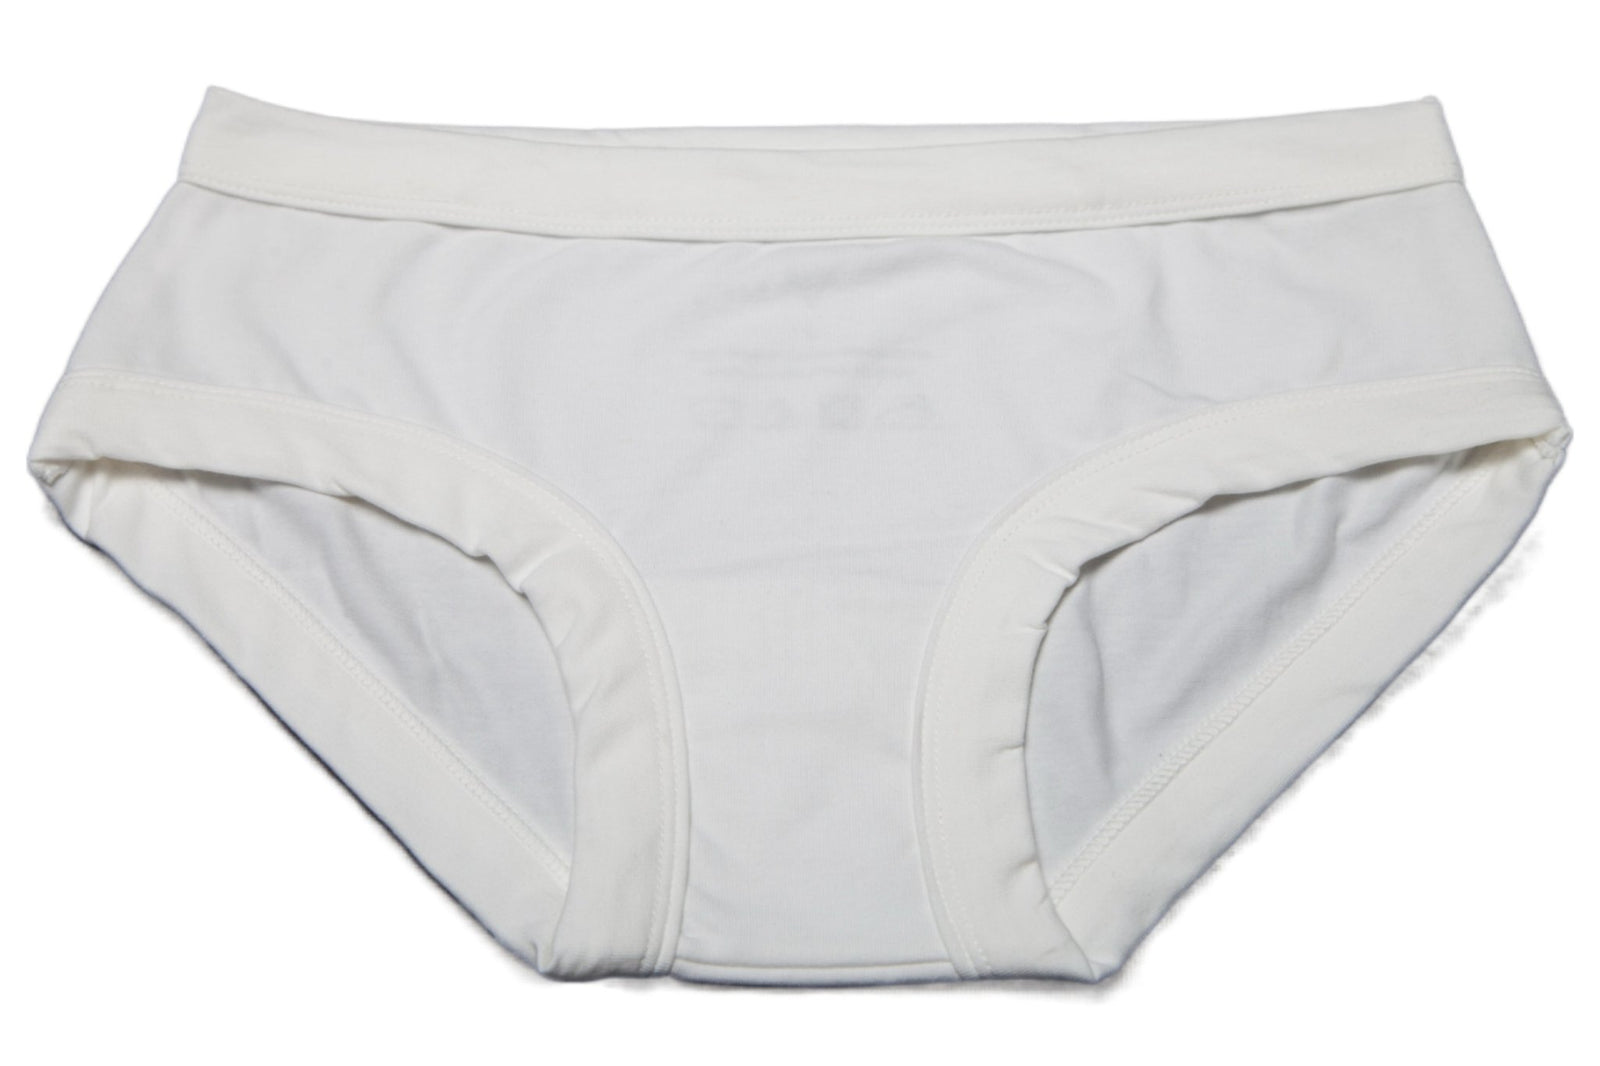 Womens, Brief, White, Organic and Fair Trade certified-The Road-stride